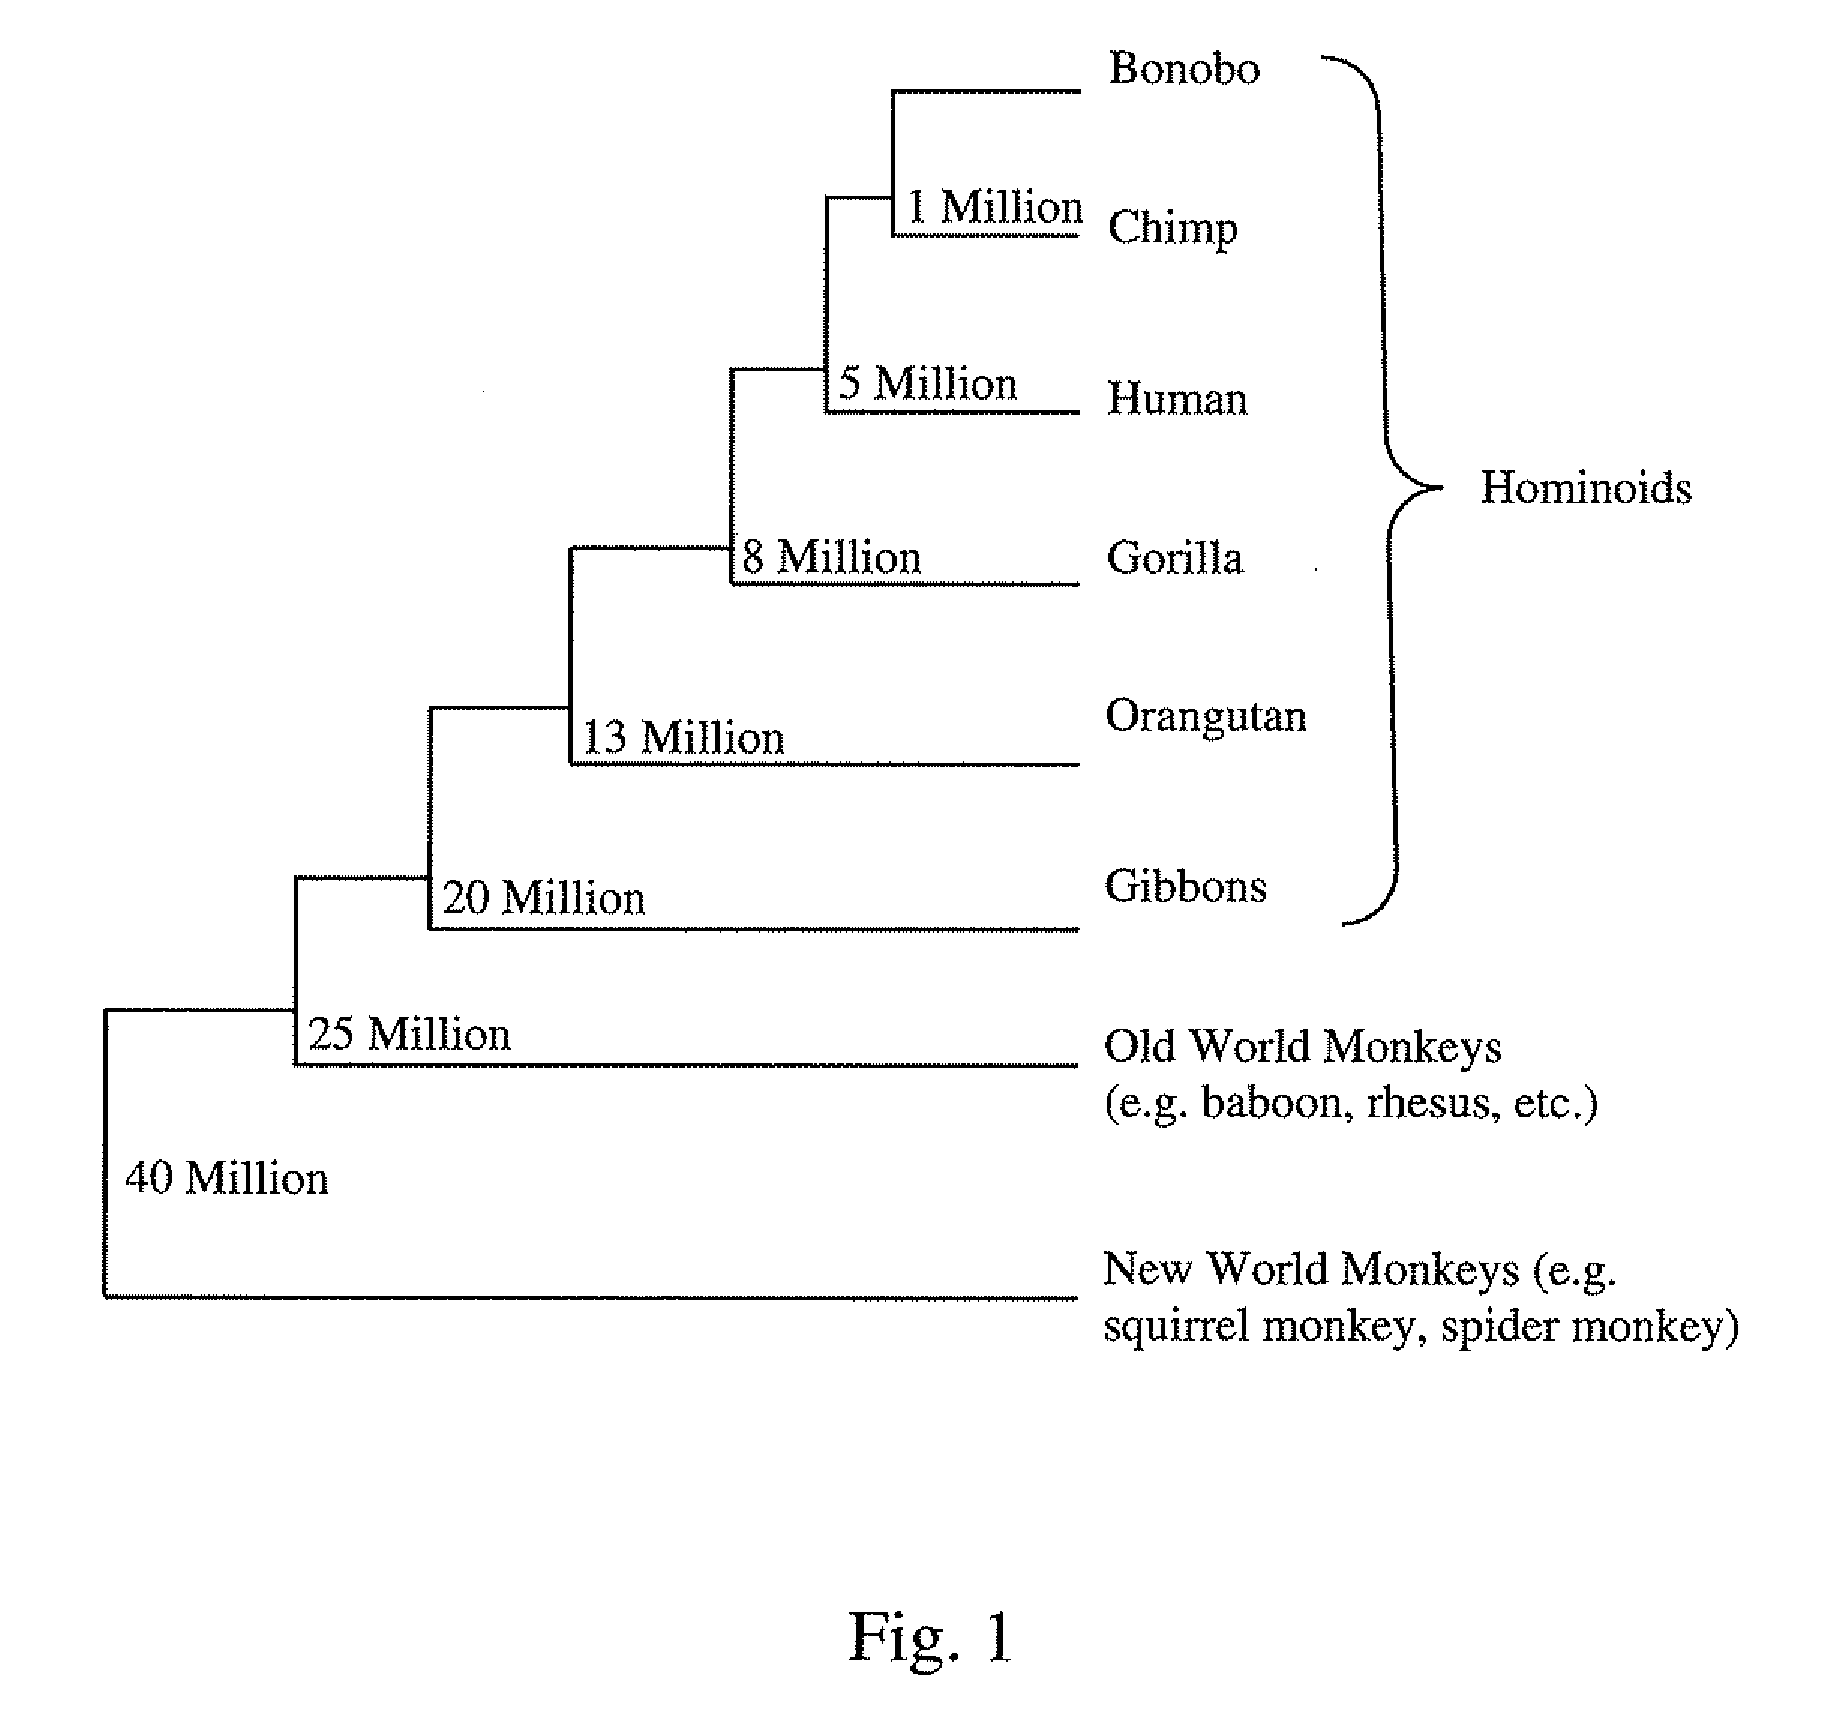 Methods to identify polynucleotide and polypeptide sequences which may be associated with physiological and medical conditions